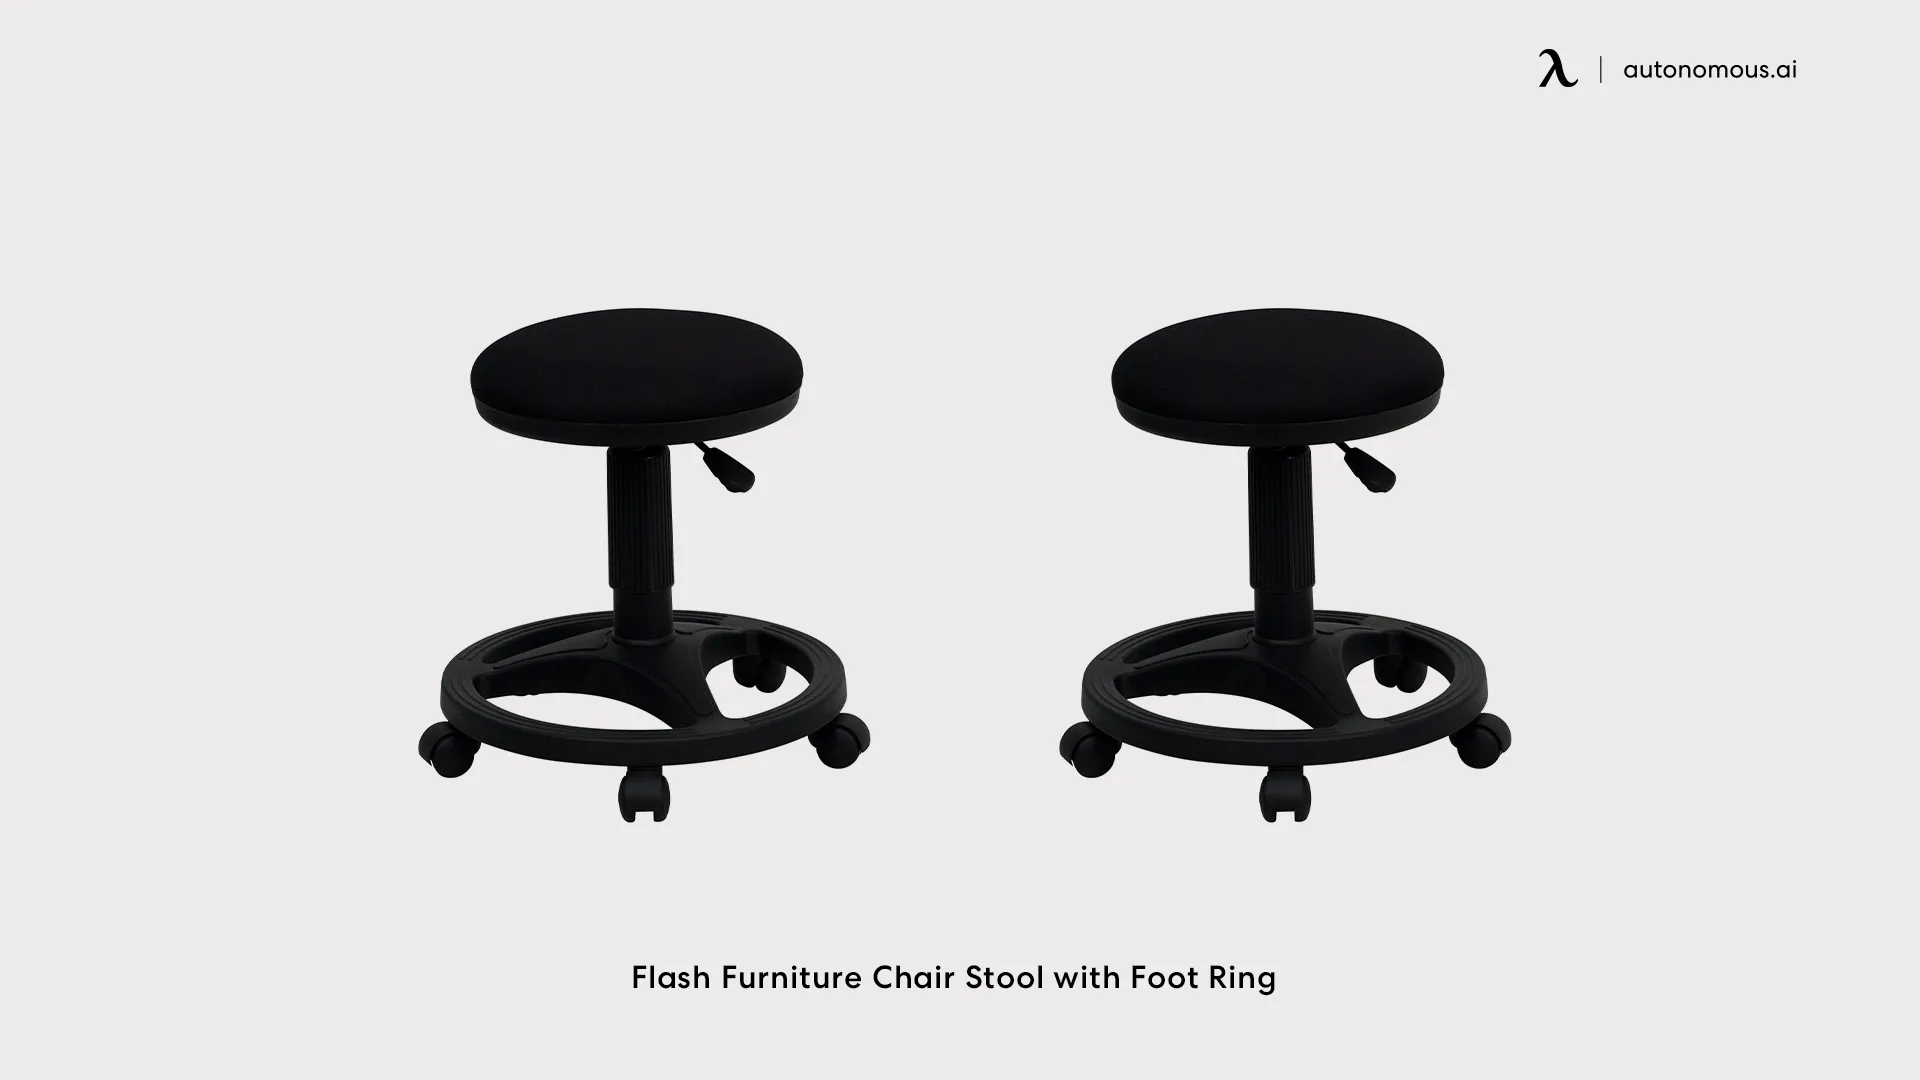 Flash Furniture Chair Stool with Foot Ring